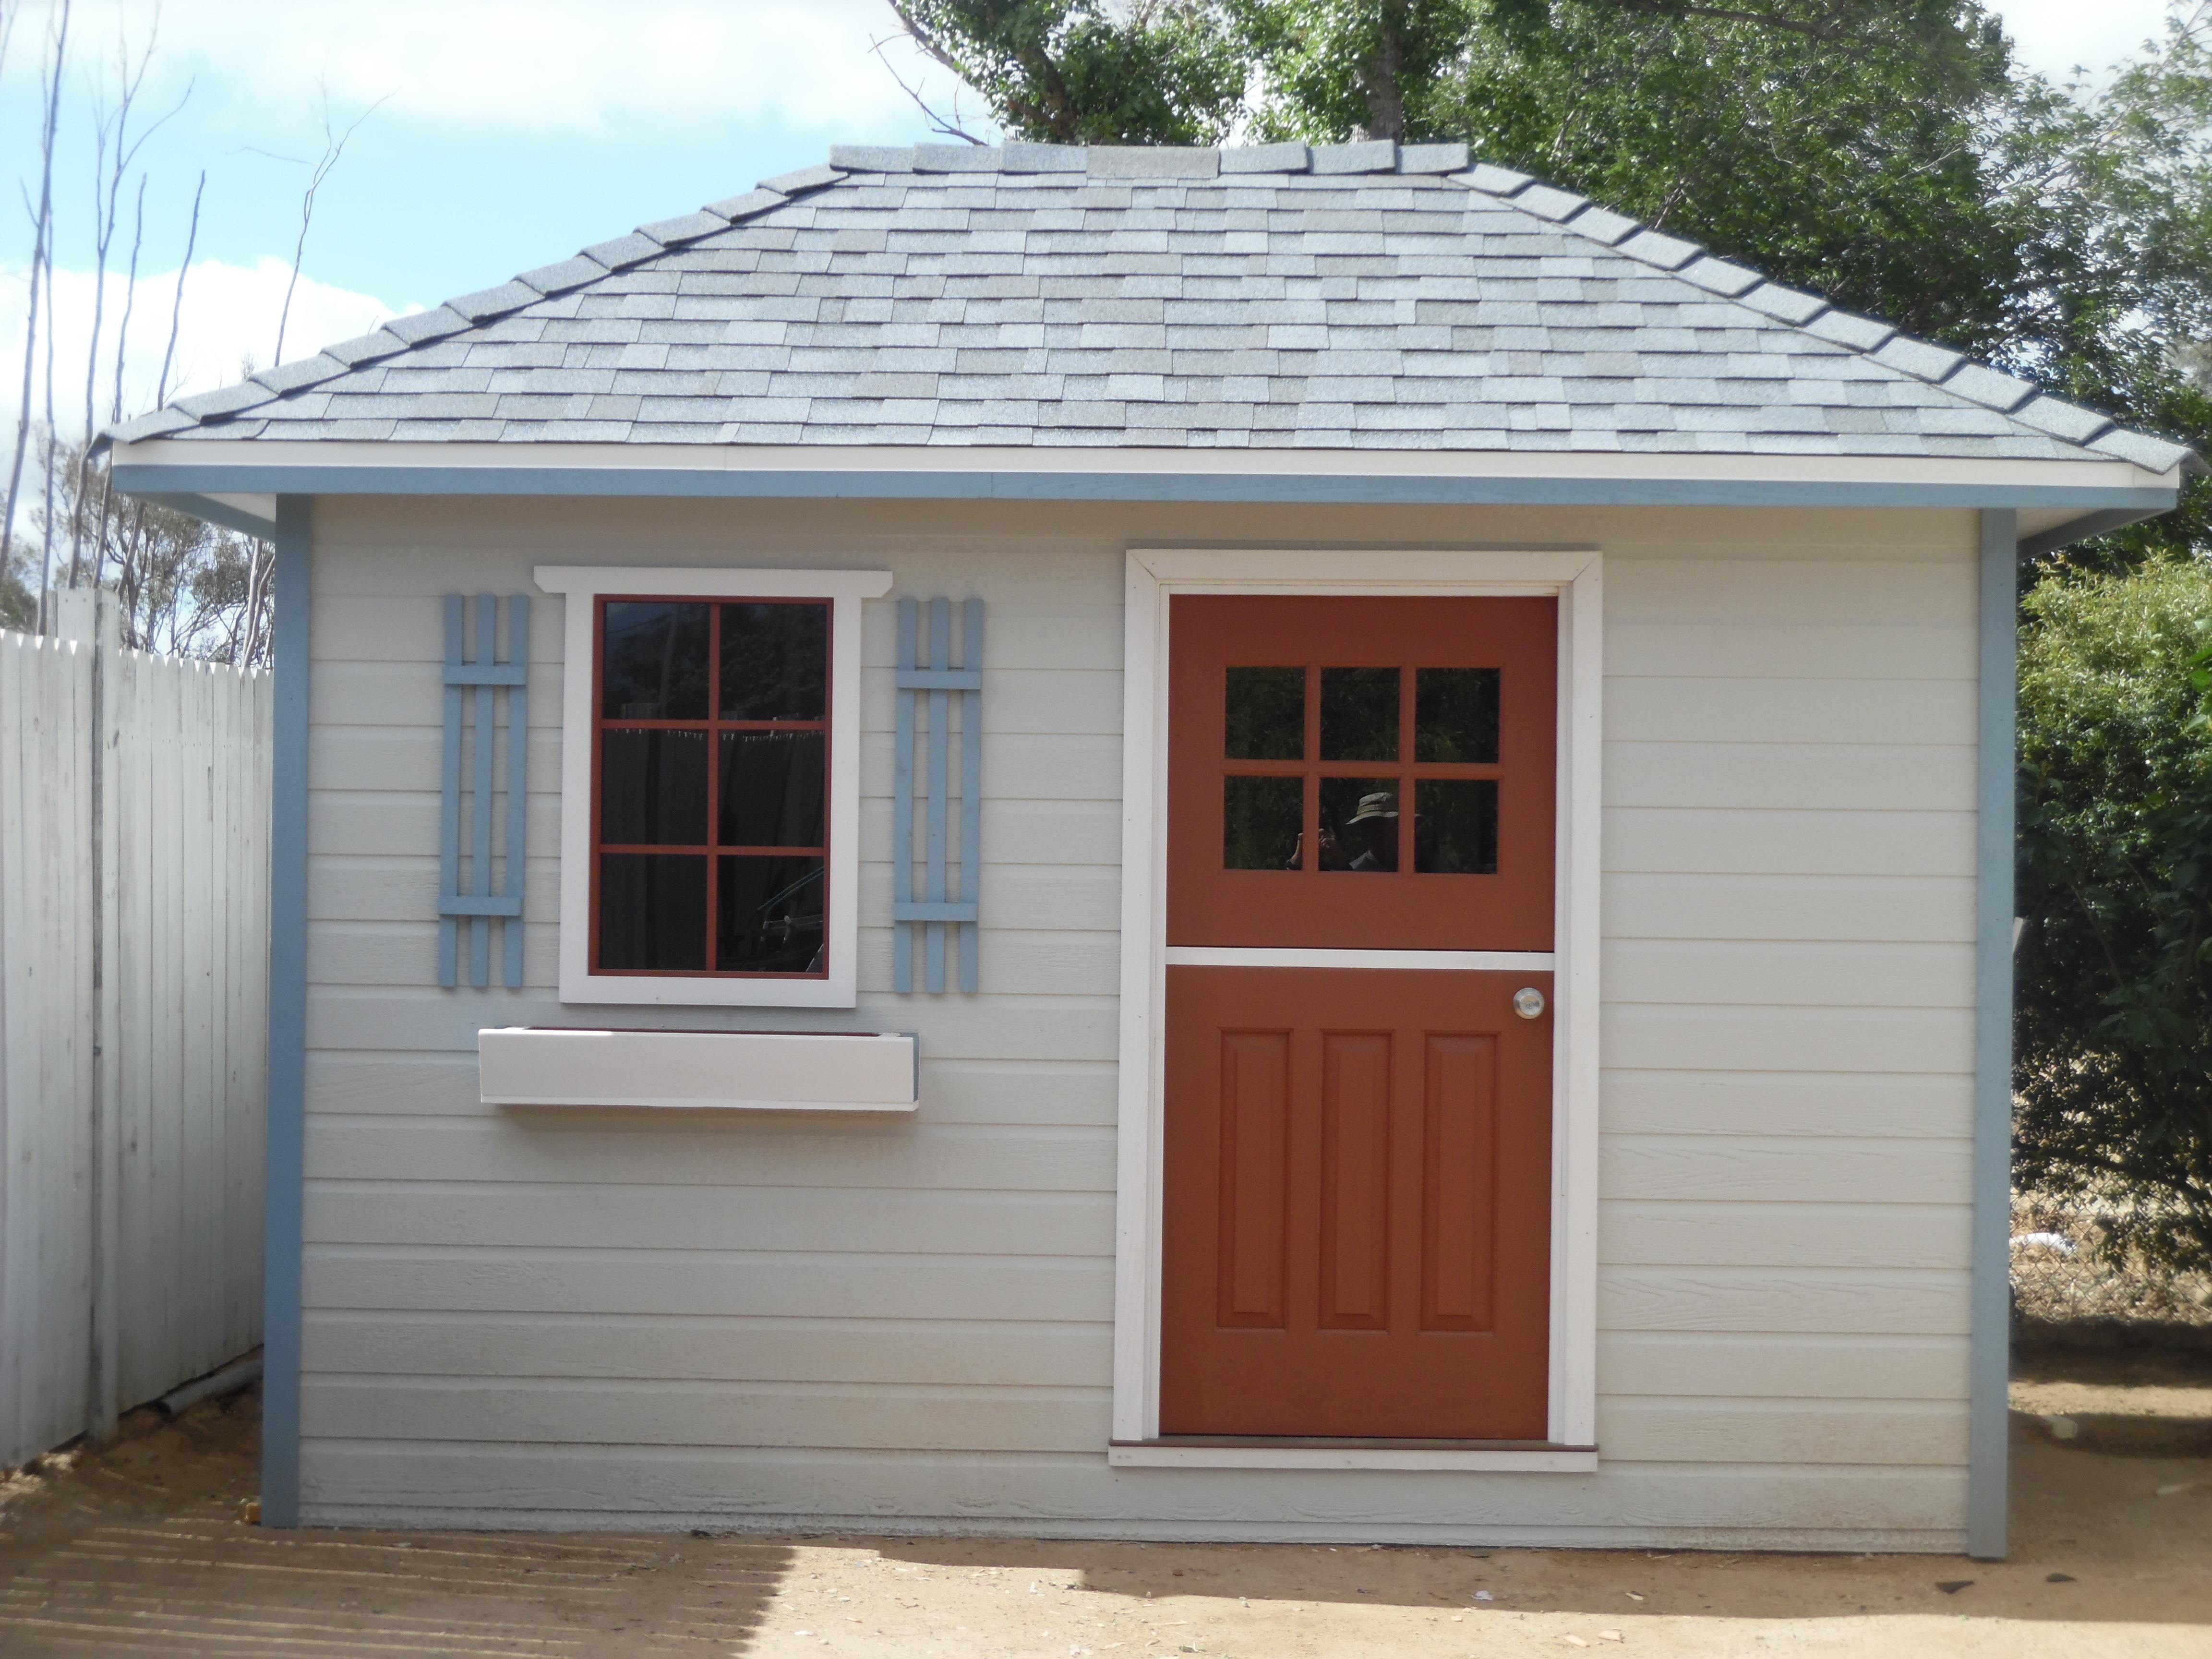 canexel sonoma shed 8x12 with single door in Beaumont, California. ID number 202472-1